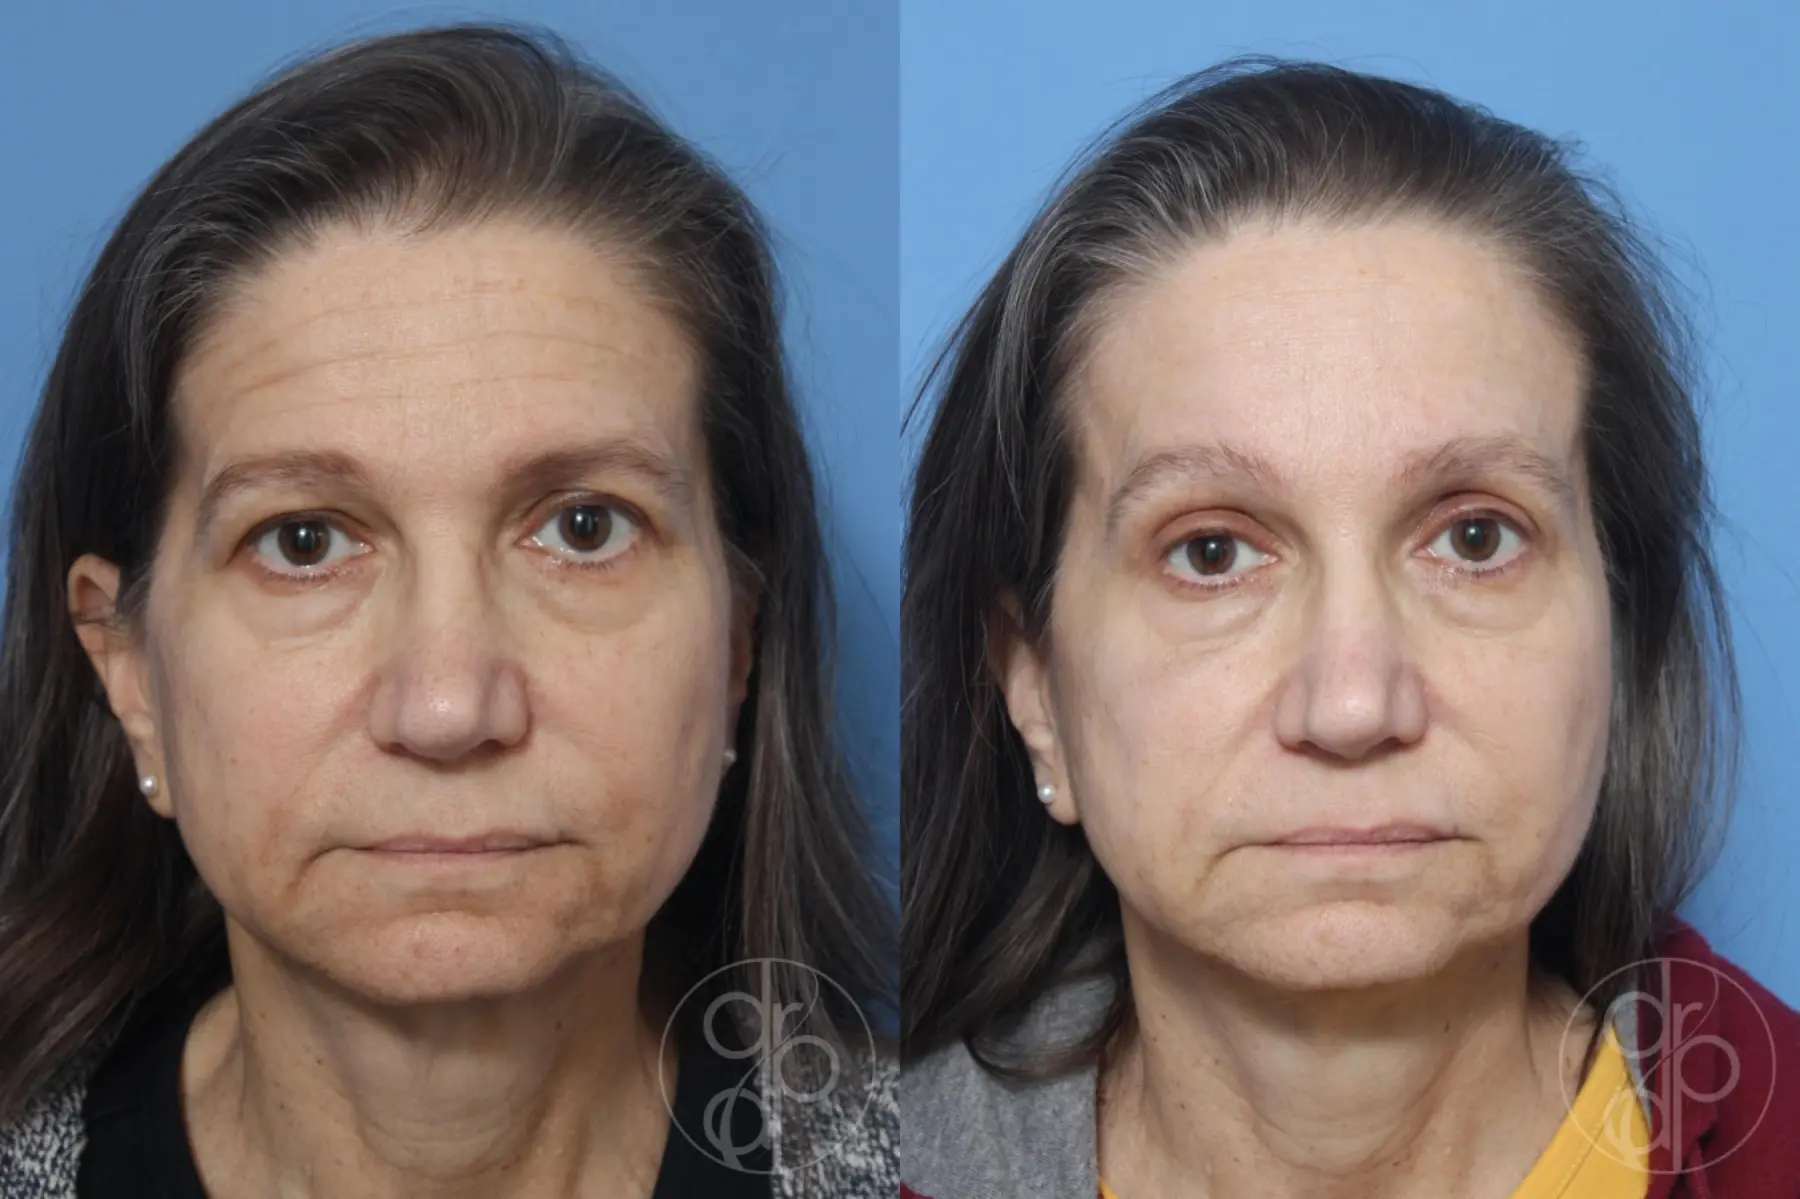 patient 12880 blepharoplasty before and after result - Before and After